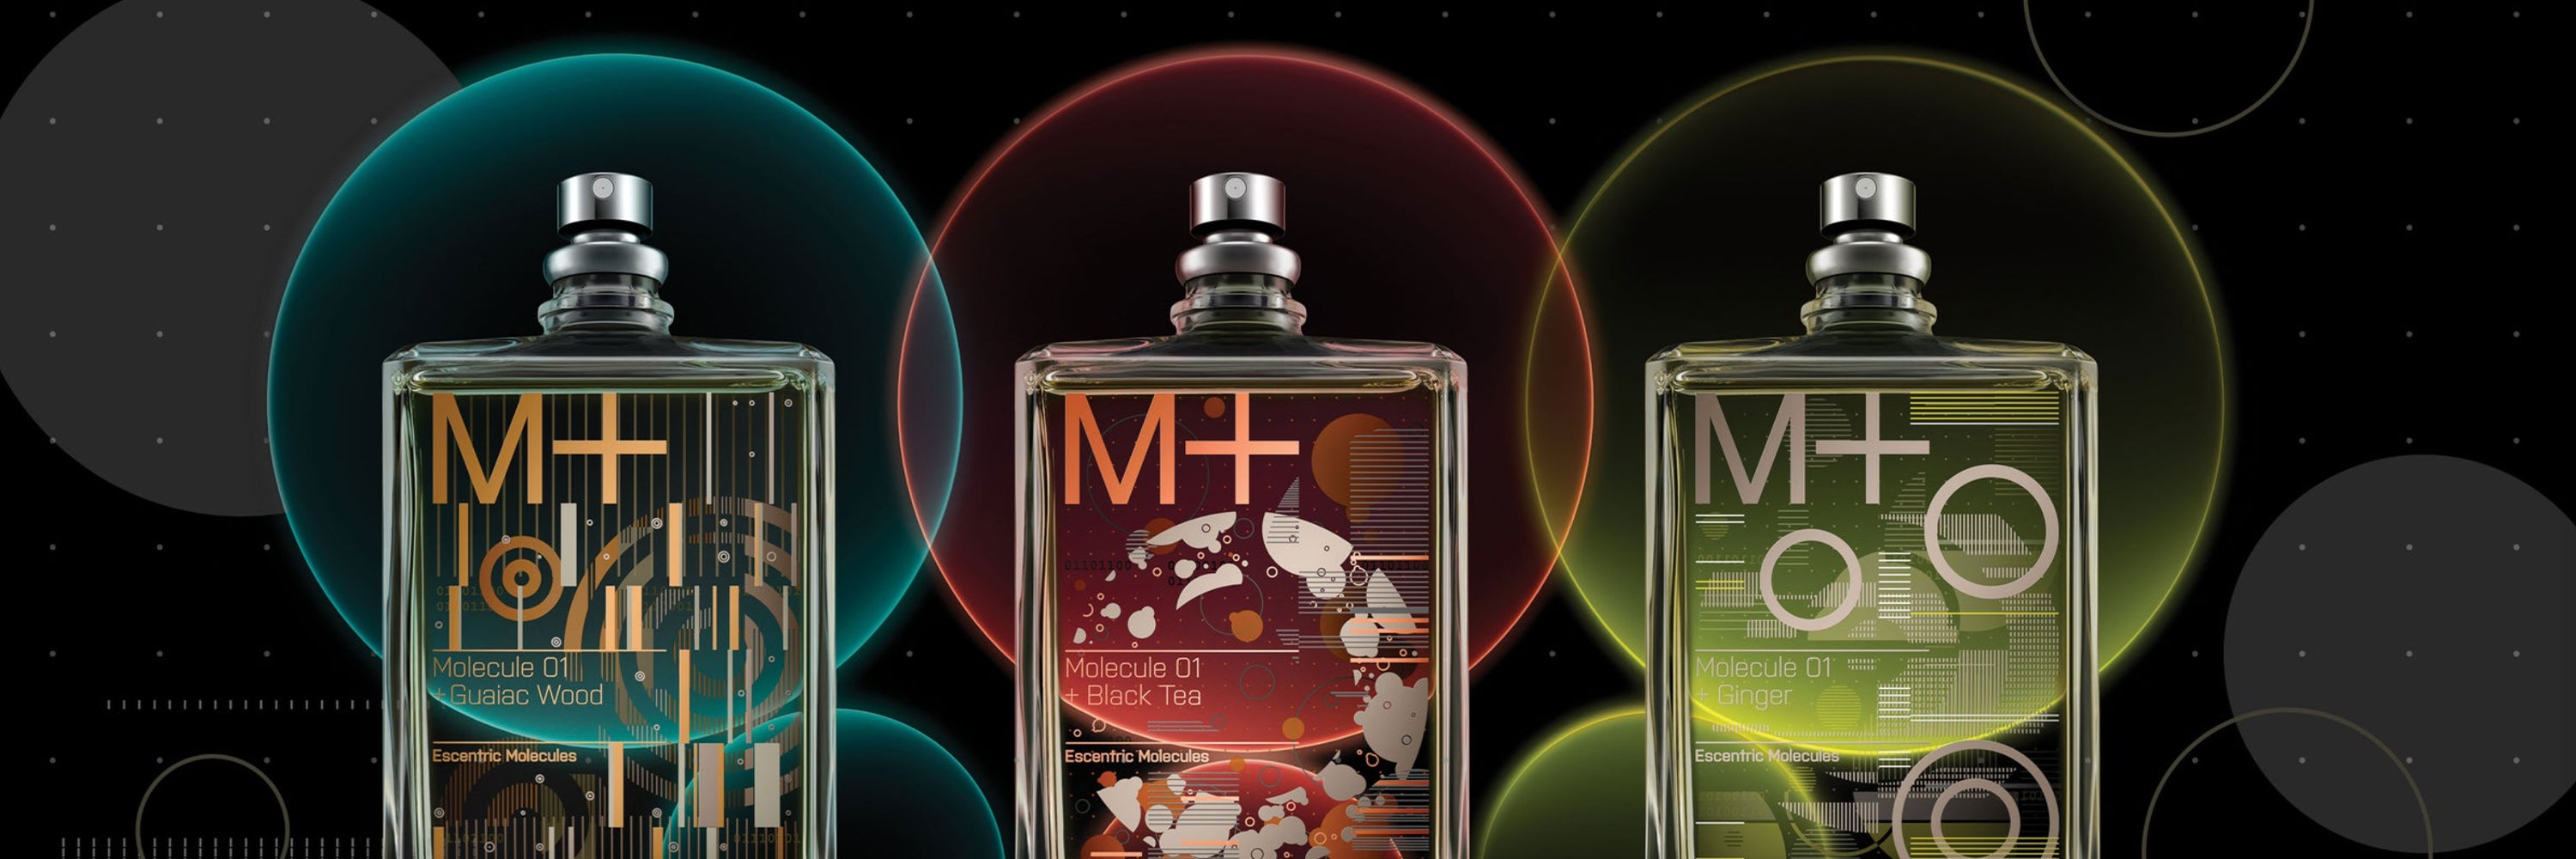 Escentric Molecules Fragrance collection at Aedes Perfumery